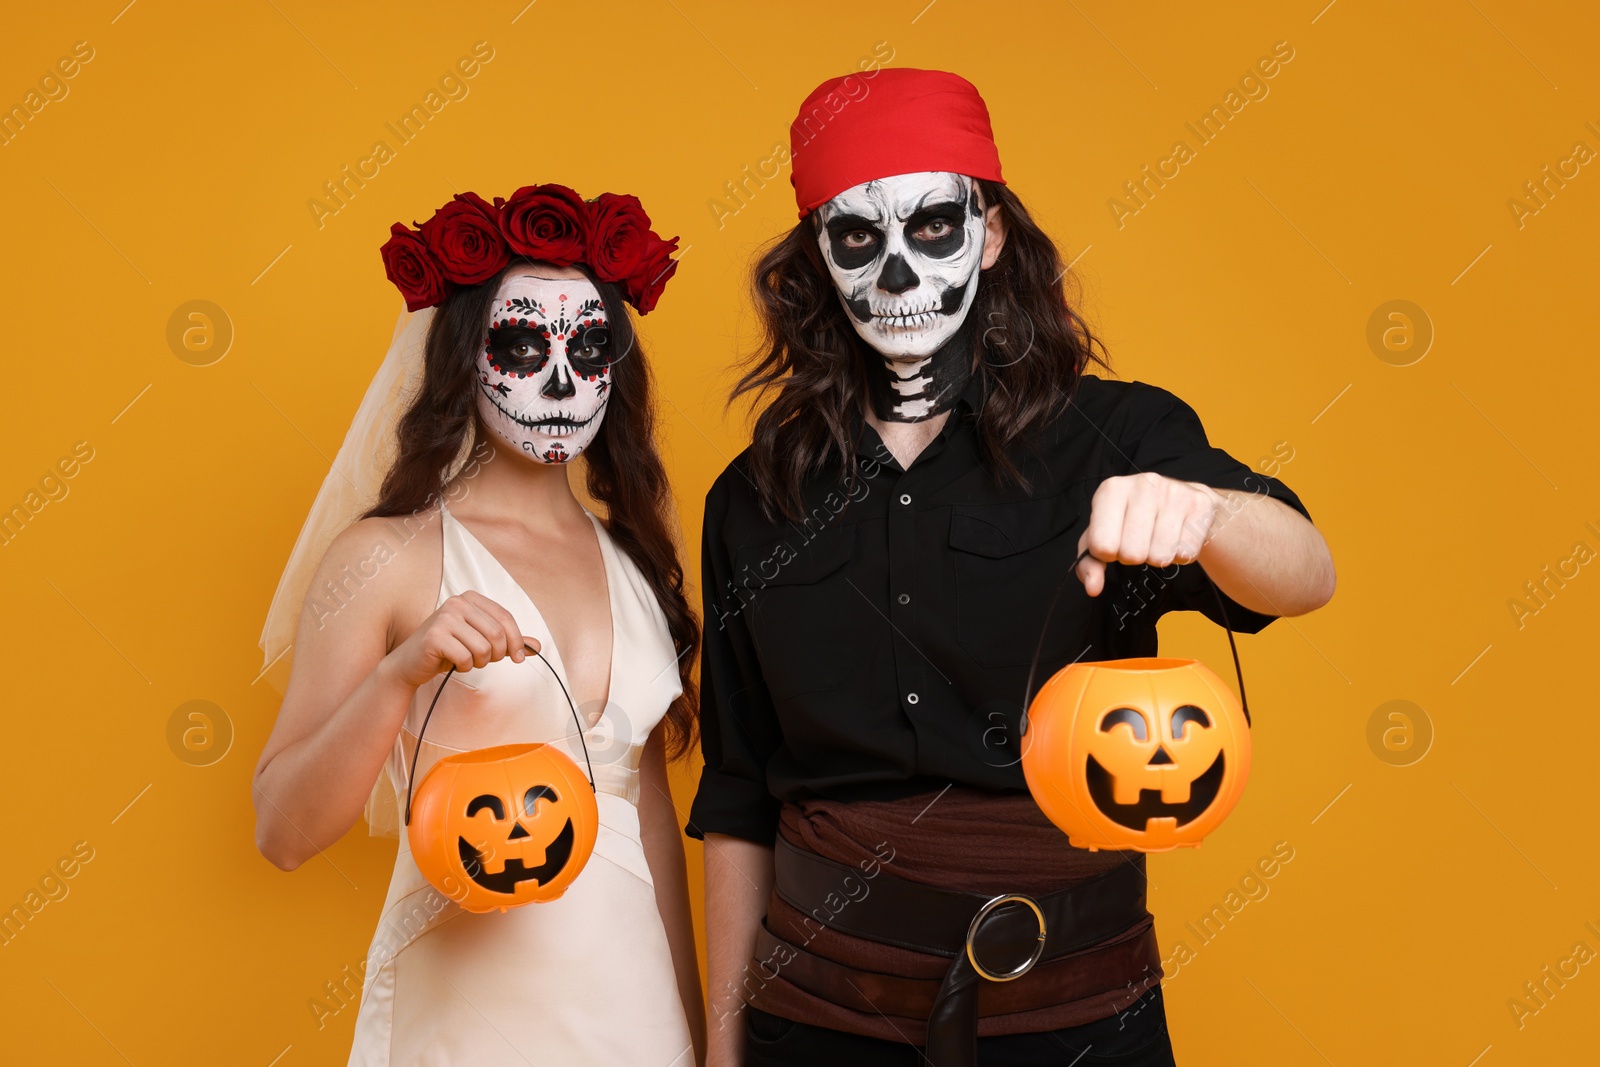 Photo of Couple in scary bride and pirate costumes with pumpkin buckets on orange background. Halloween celebration